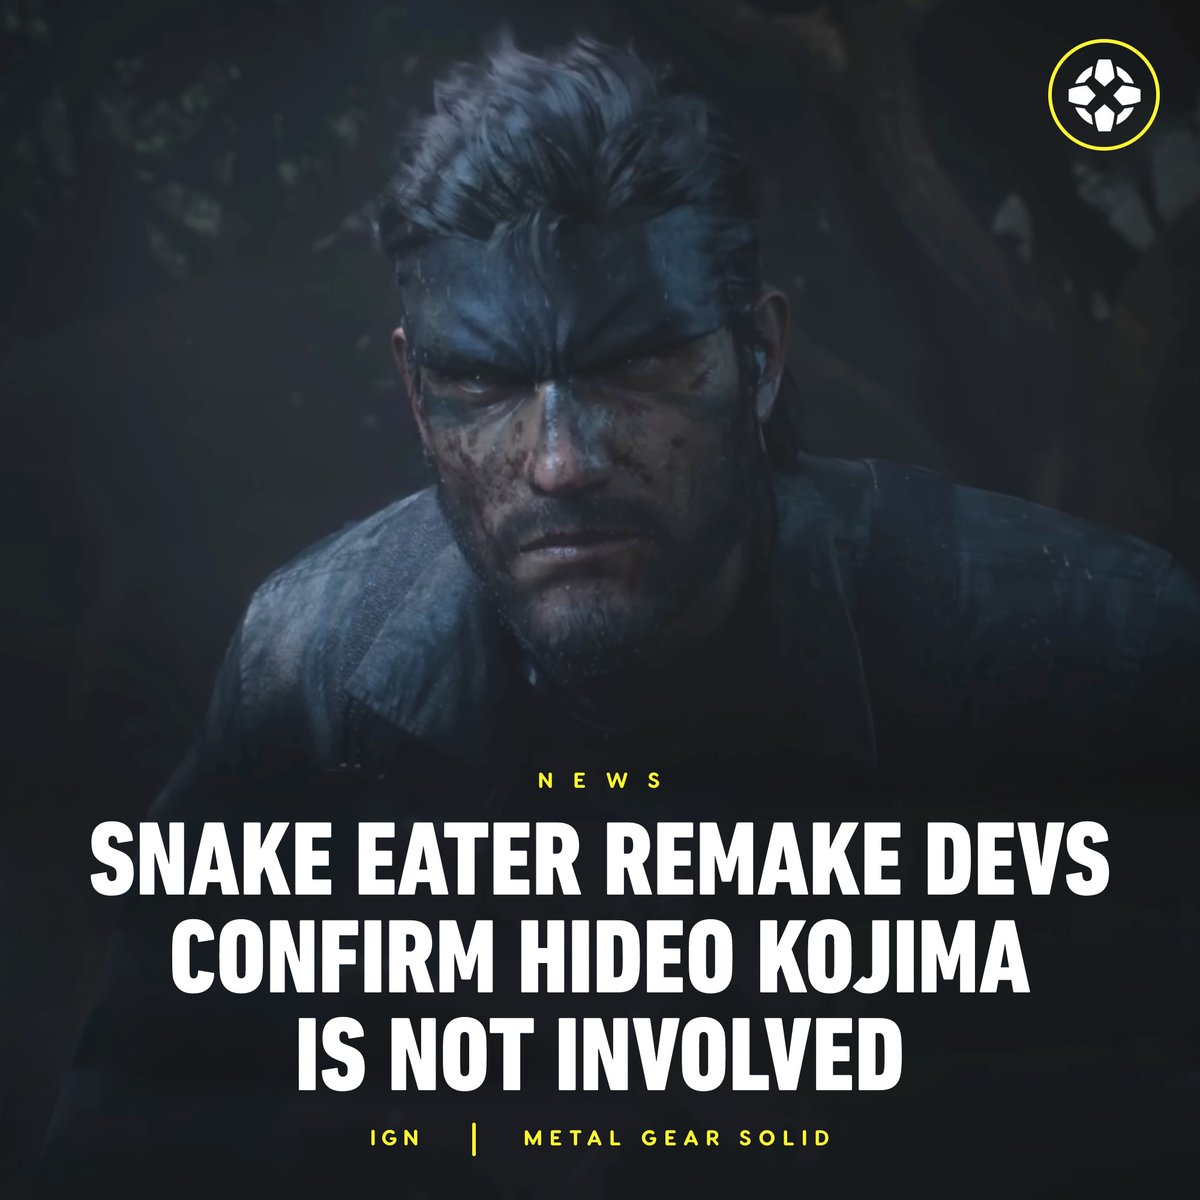 The Metal Gear Solid Δ: Snake Eater team discussed with IGN whether Hideo Kojima or Yoji Shinkawa had any involvement in the project, if there will be more remakes from the Metal Gear Solid series, and more. bit.ly/43e5883